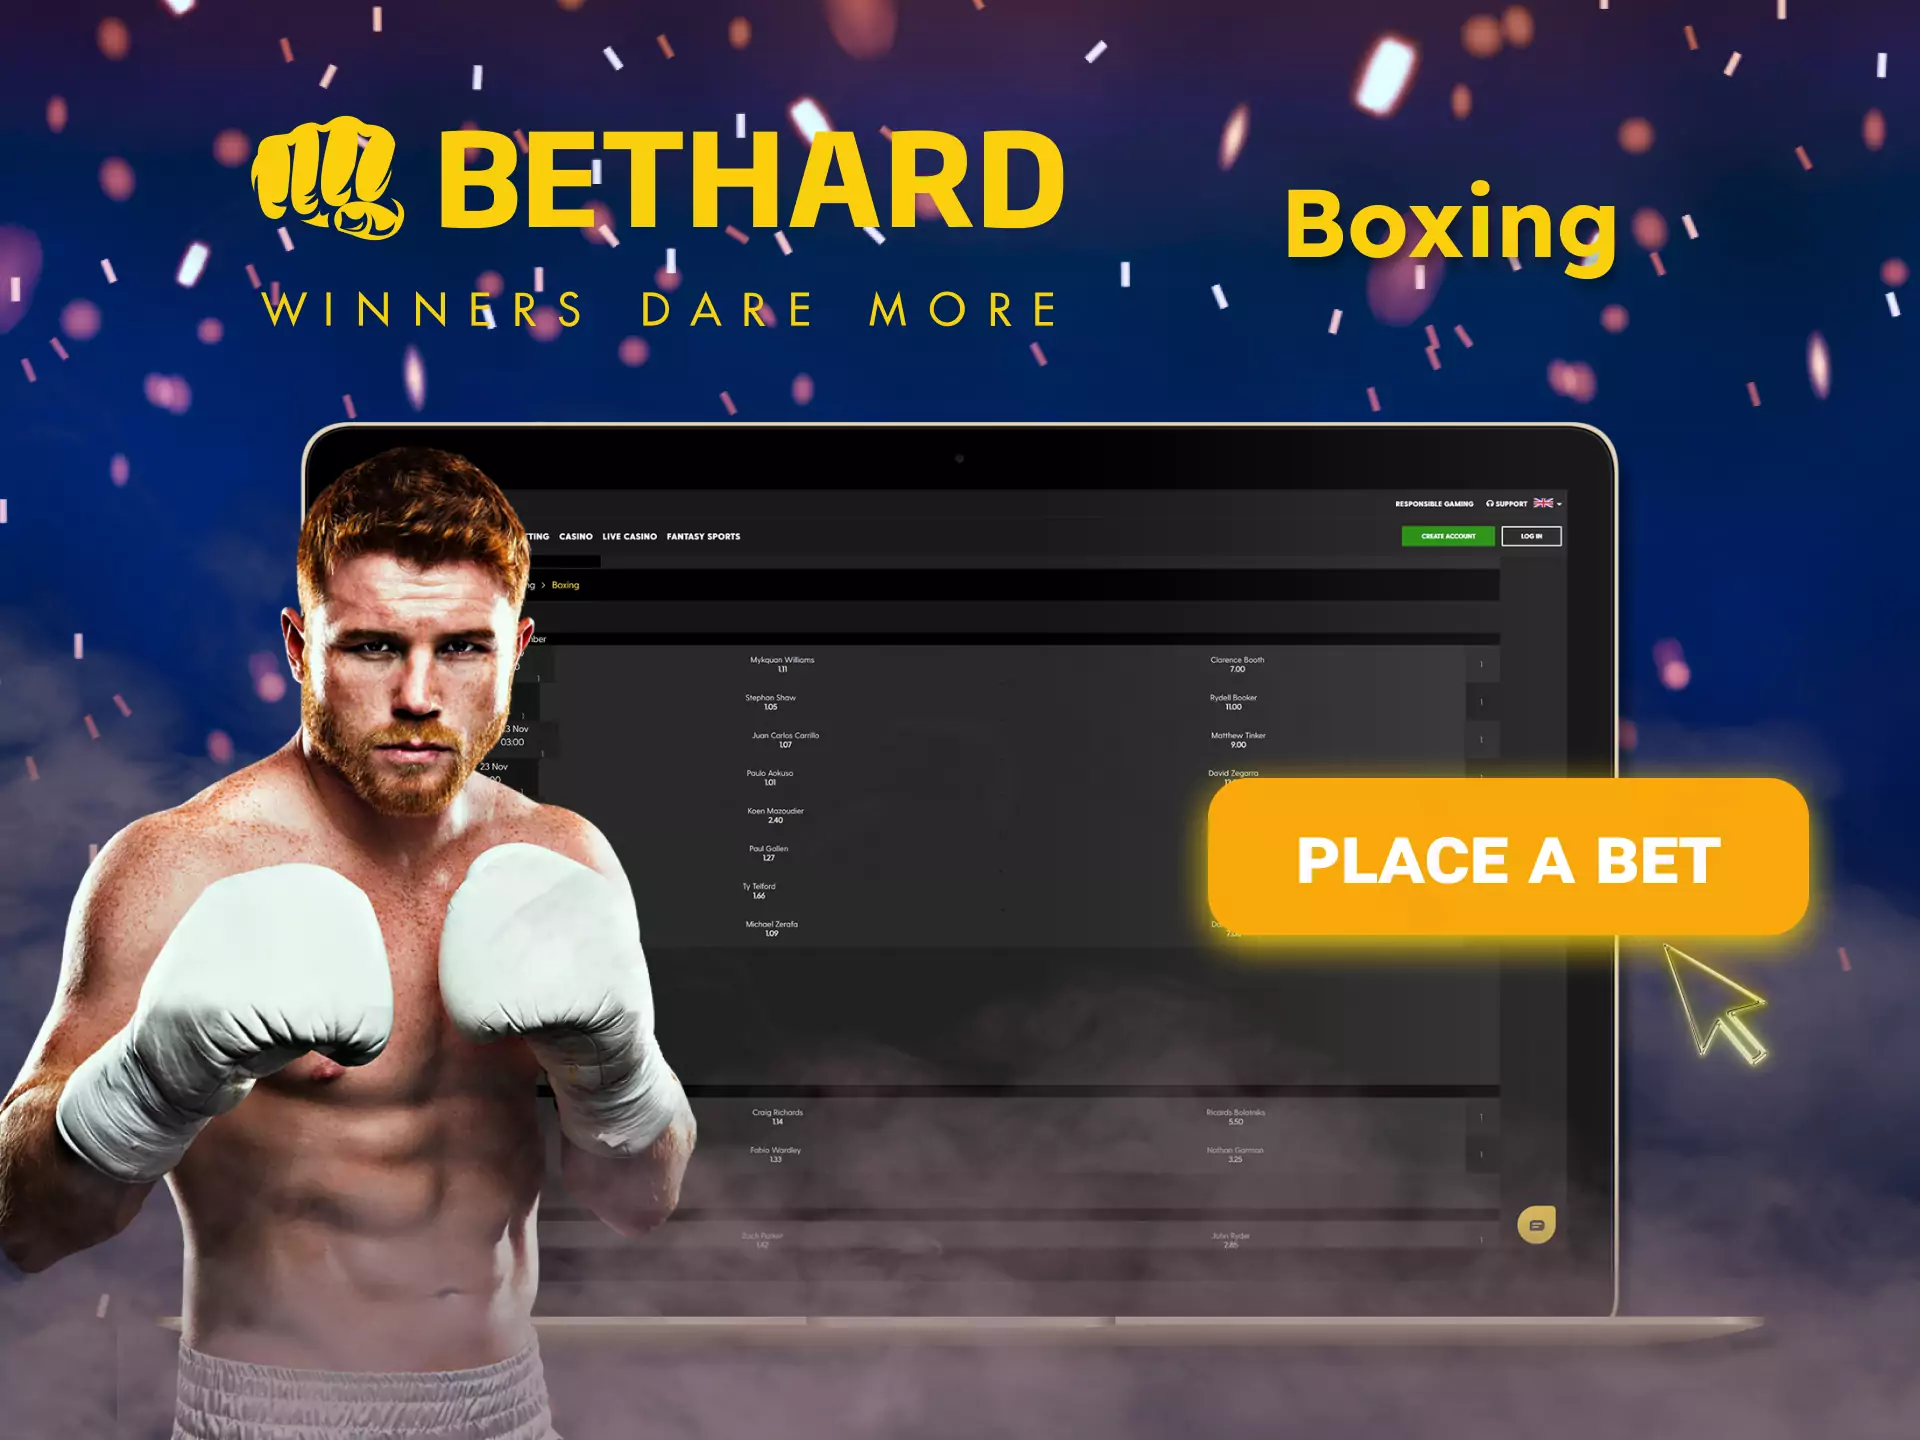 Choose a favorite in the boxing world and place bets with Bethard.